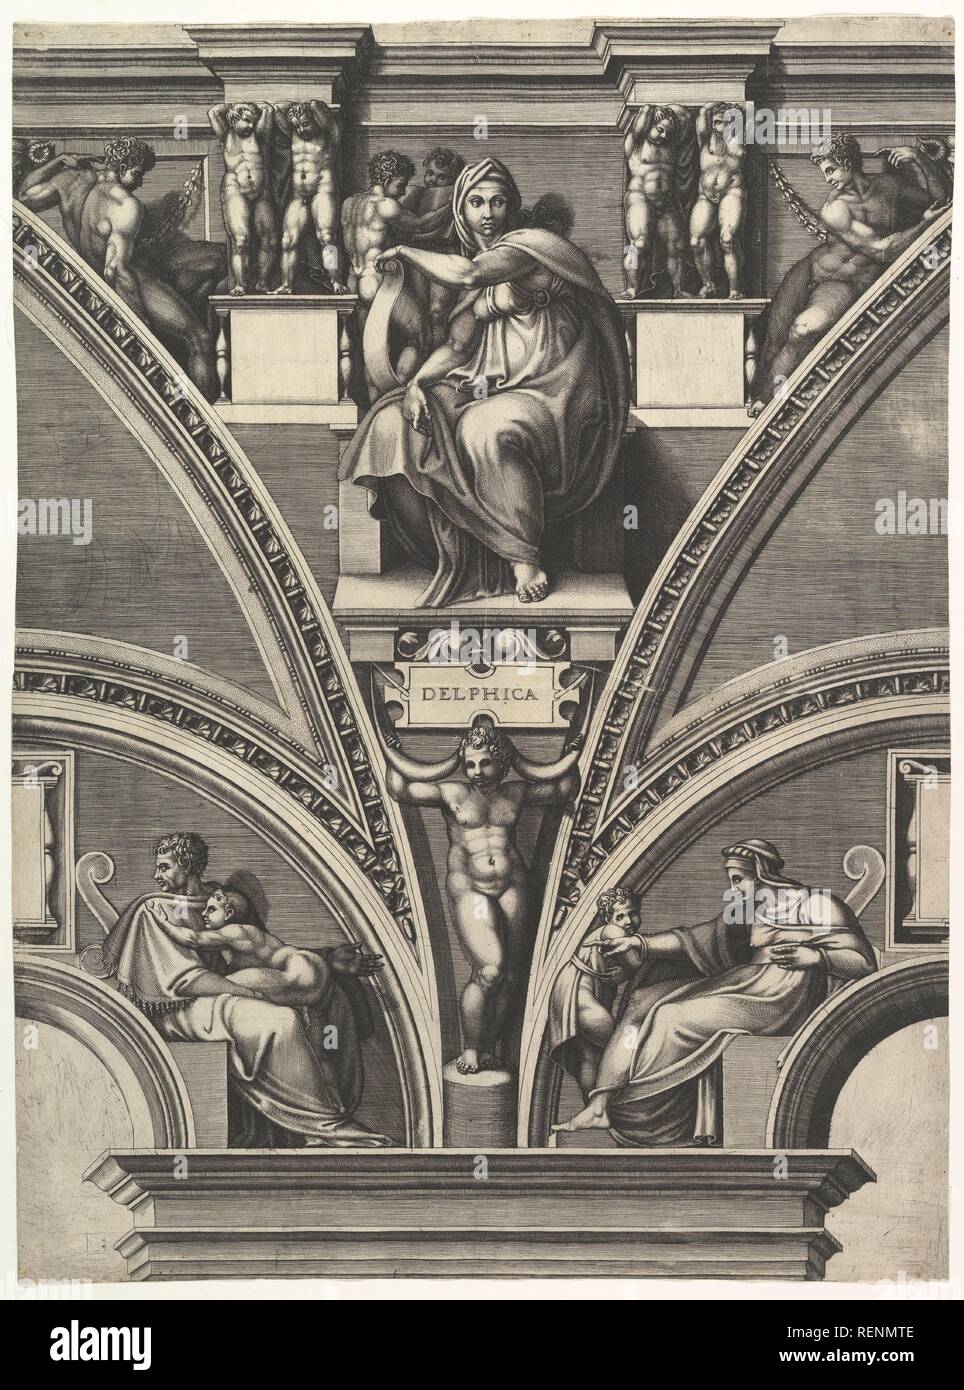 The Delphic Sibyl; from the series of Prophets and Sibyls in the Sistine Chapel. Artist: After Michelangelo Buonarroti (Italian, Caprese 1475-1564 Rome); Giorgio Ghisi (Italian, Mantua ca. 1520-1582 Mantua). Dimensions: Sheet (Trimmed): 22 1/4 × 16 9/16 in. (56.5 × 42 cm). Date: 1570-75. Museum: Metropolitan Museum of Art, New York, USA. Stock Photo